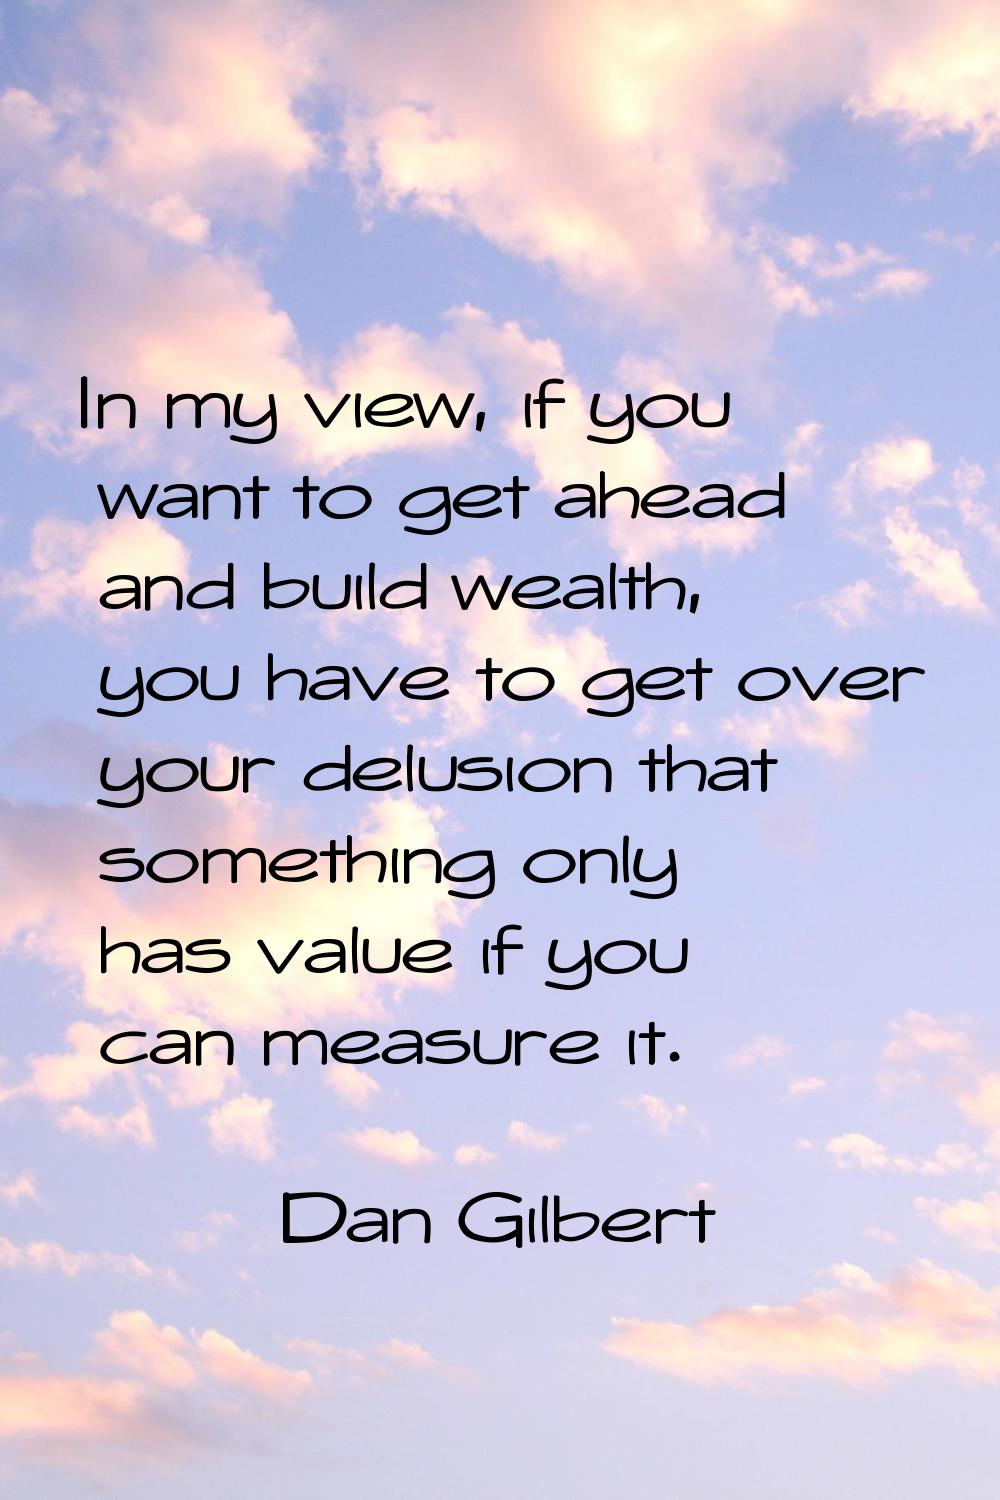 In my view, if you want to get ahead and build wealth, you have to get over your delusion that some